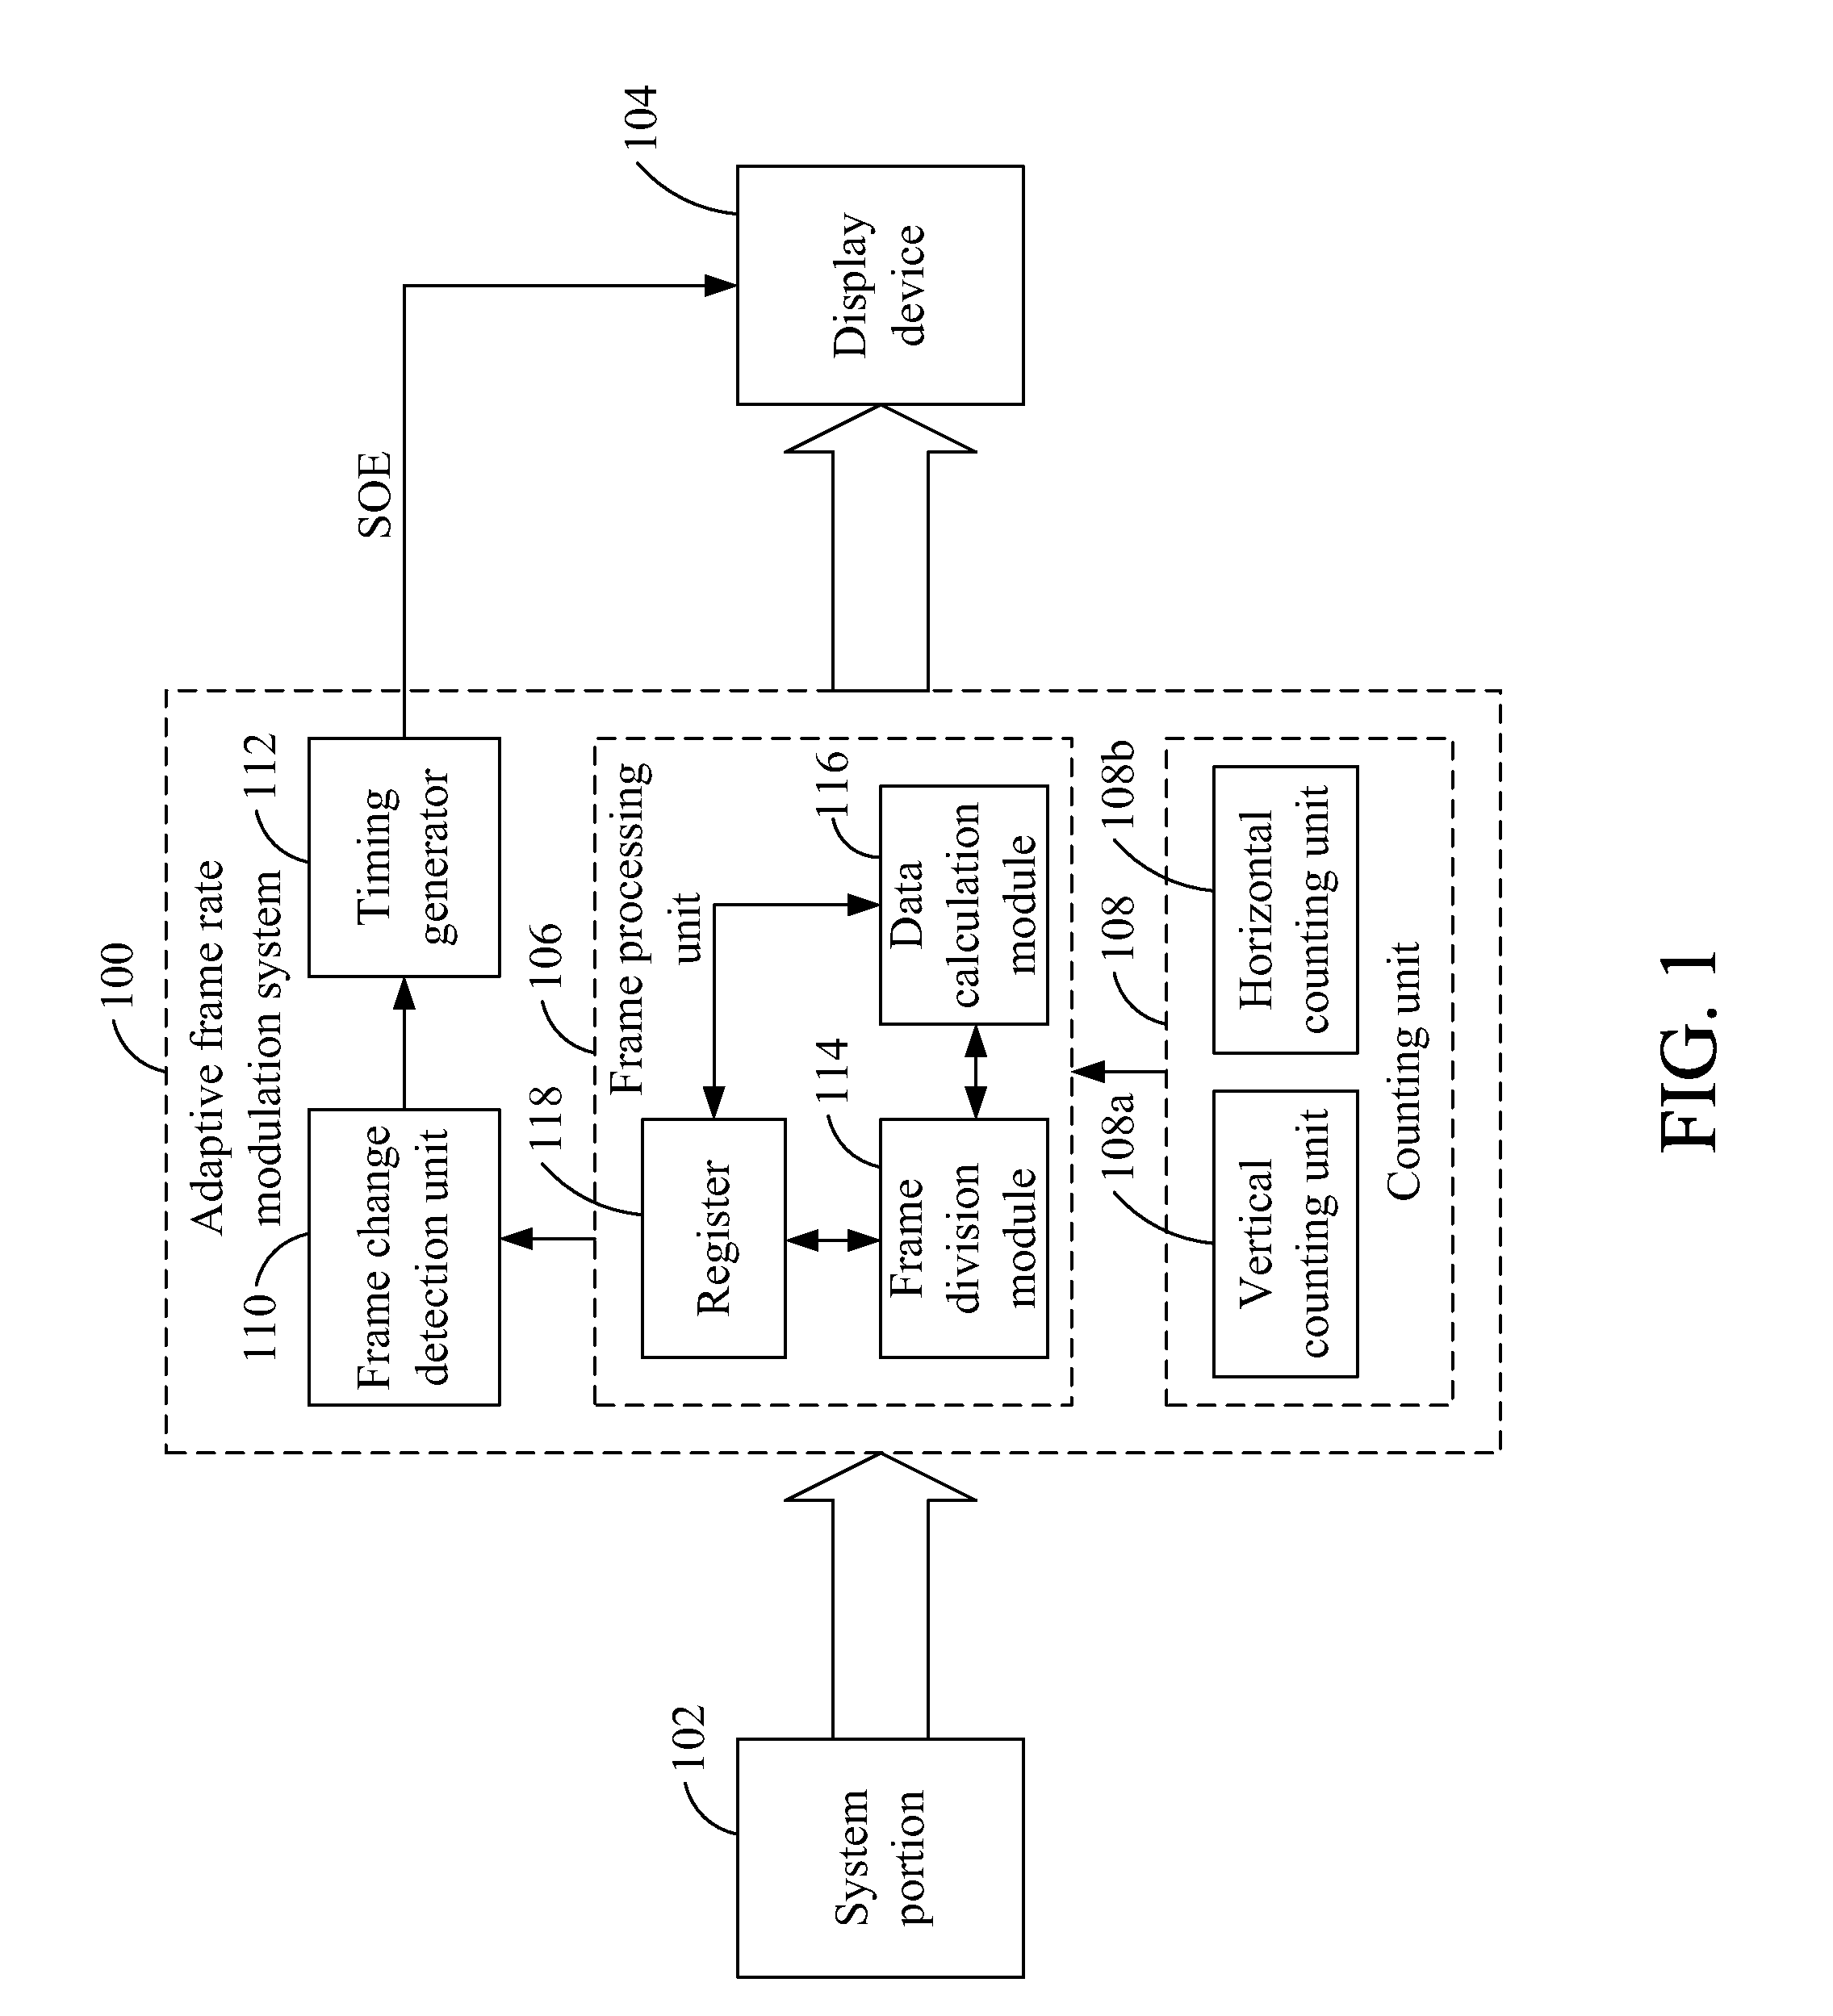 Adaptive frame rate modulation system and method thereof